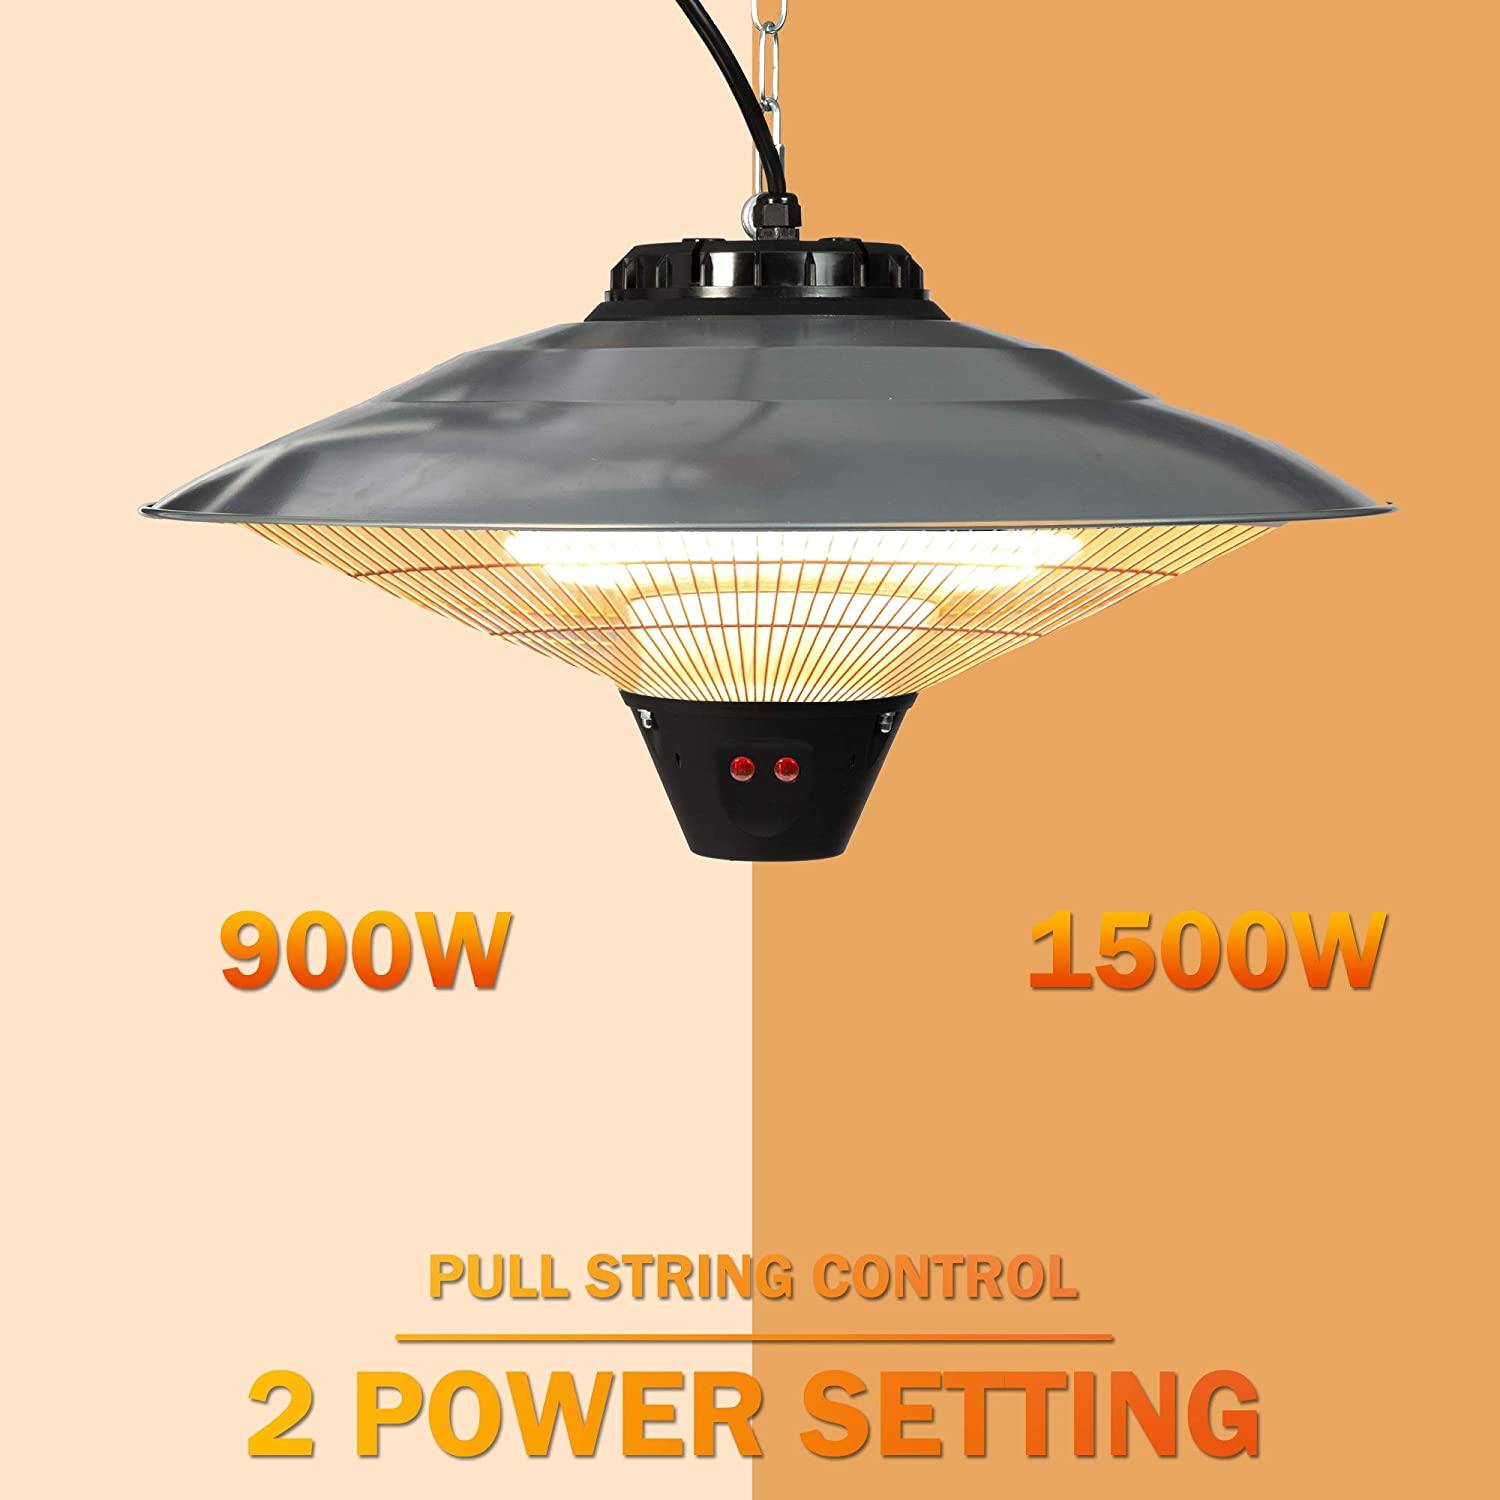 Electric Patio Heater Ceiling Mounted or Hanging Infrared Heater, Waterproof IP24, for Outdoor or Indoor Use, 900W-1500W, 5100 BTU - Bosonshop